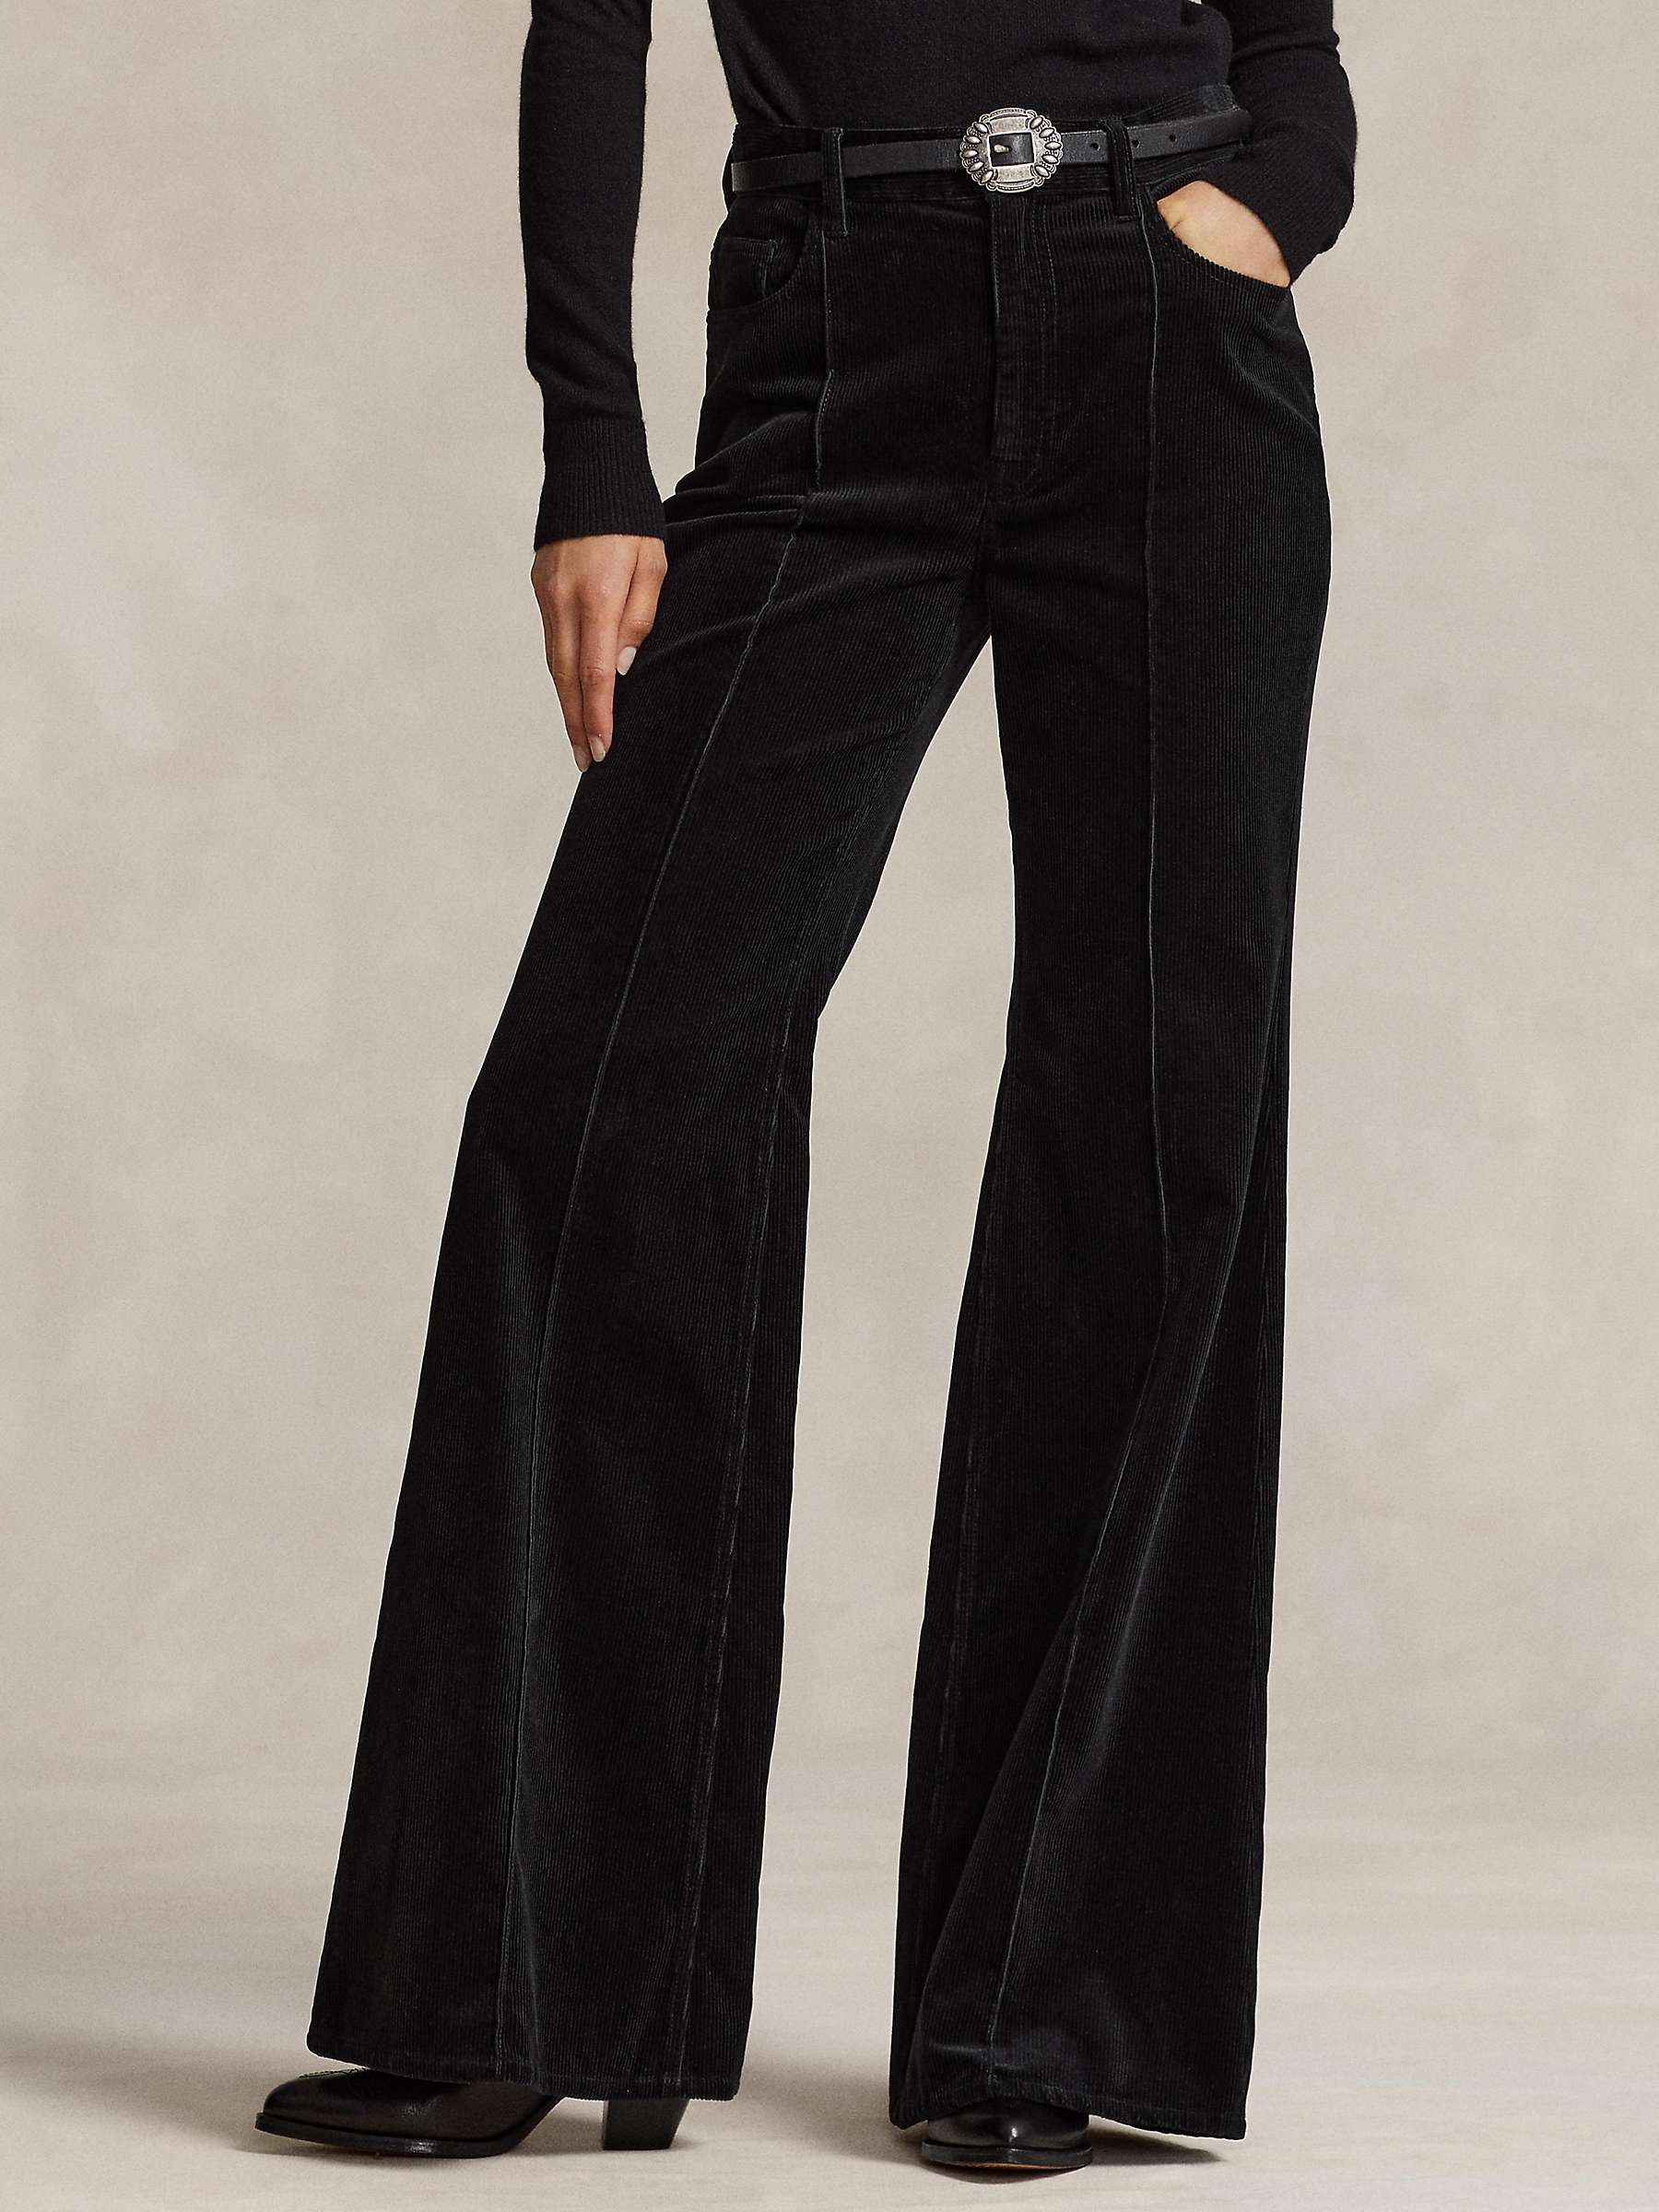 Buy Polo Ralph Lauren Pintucked Corduroy Flare Flat Front Trousers, Black Online at johnlewis.com